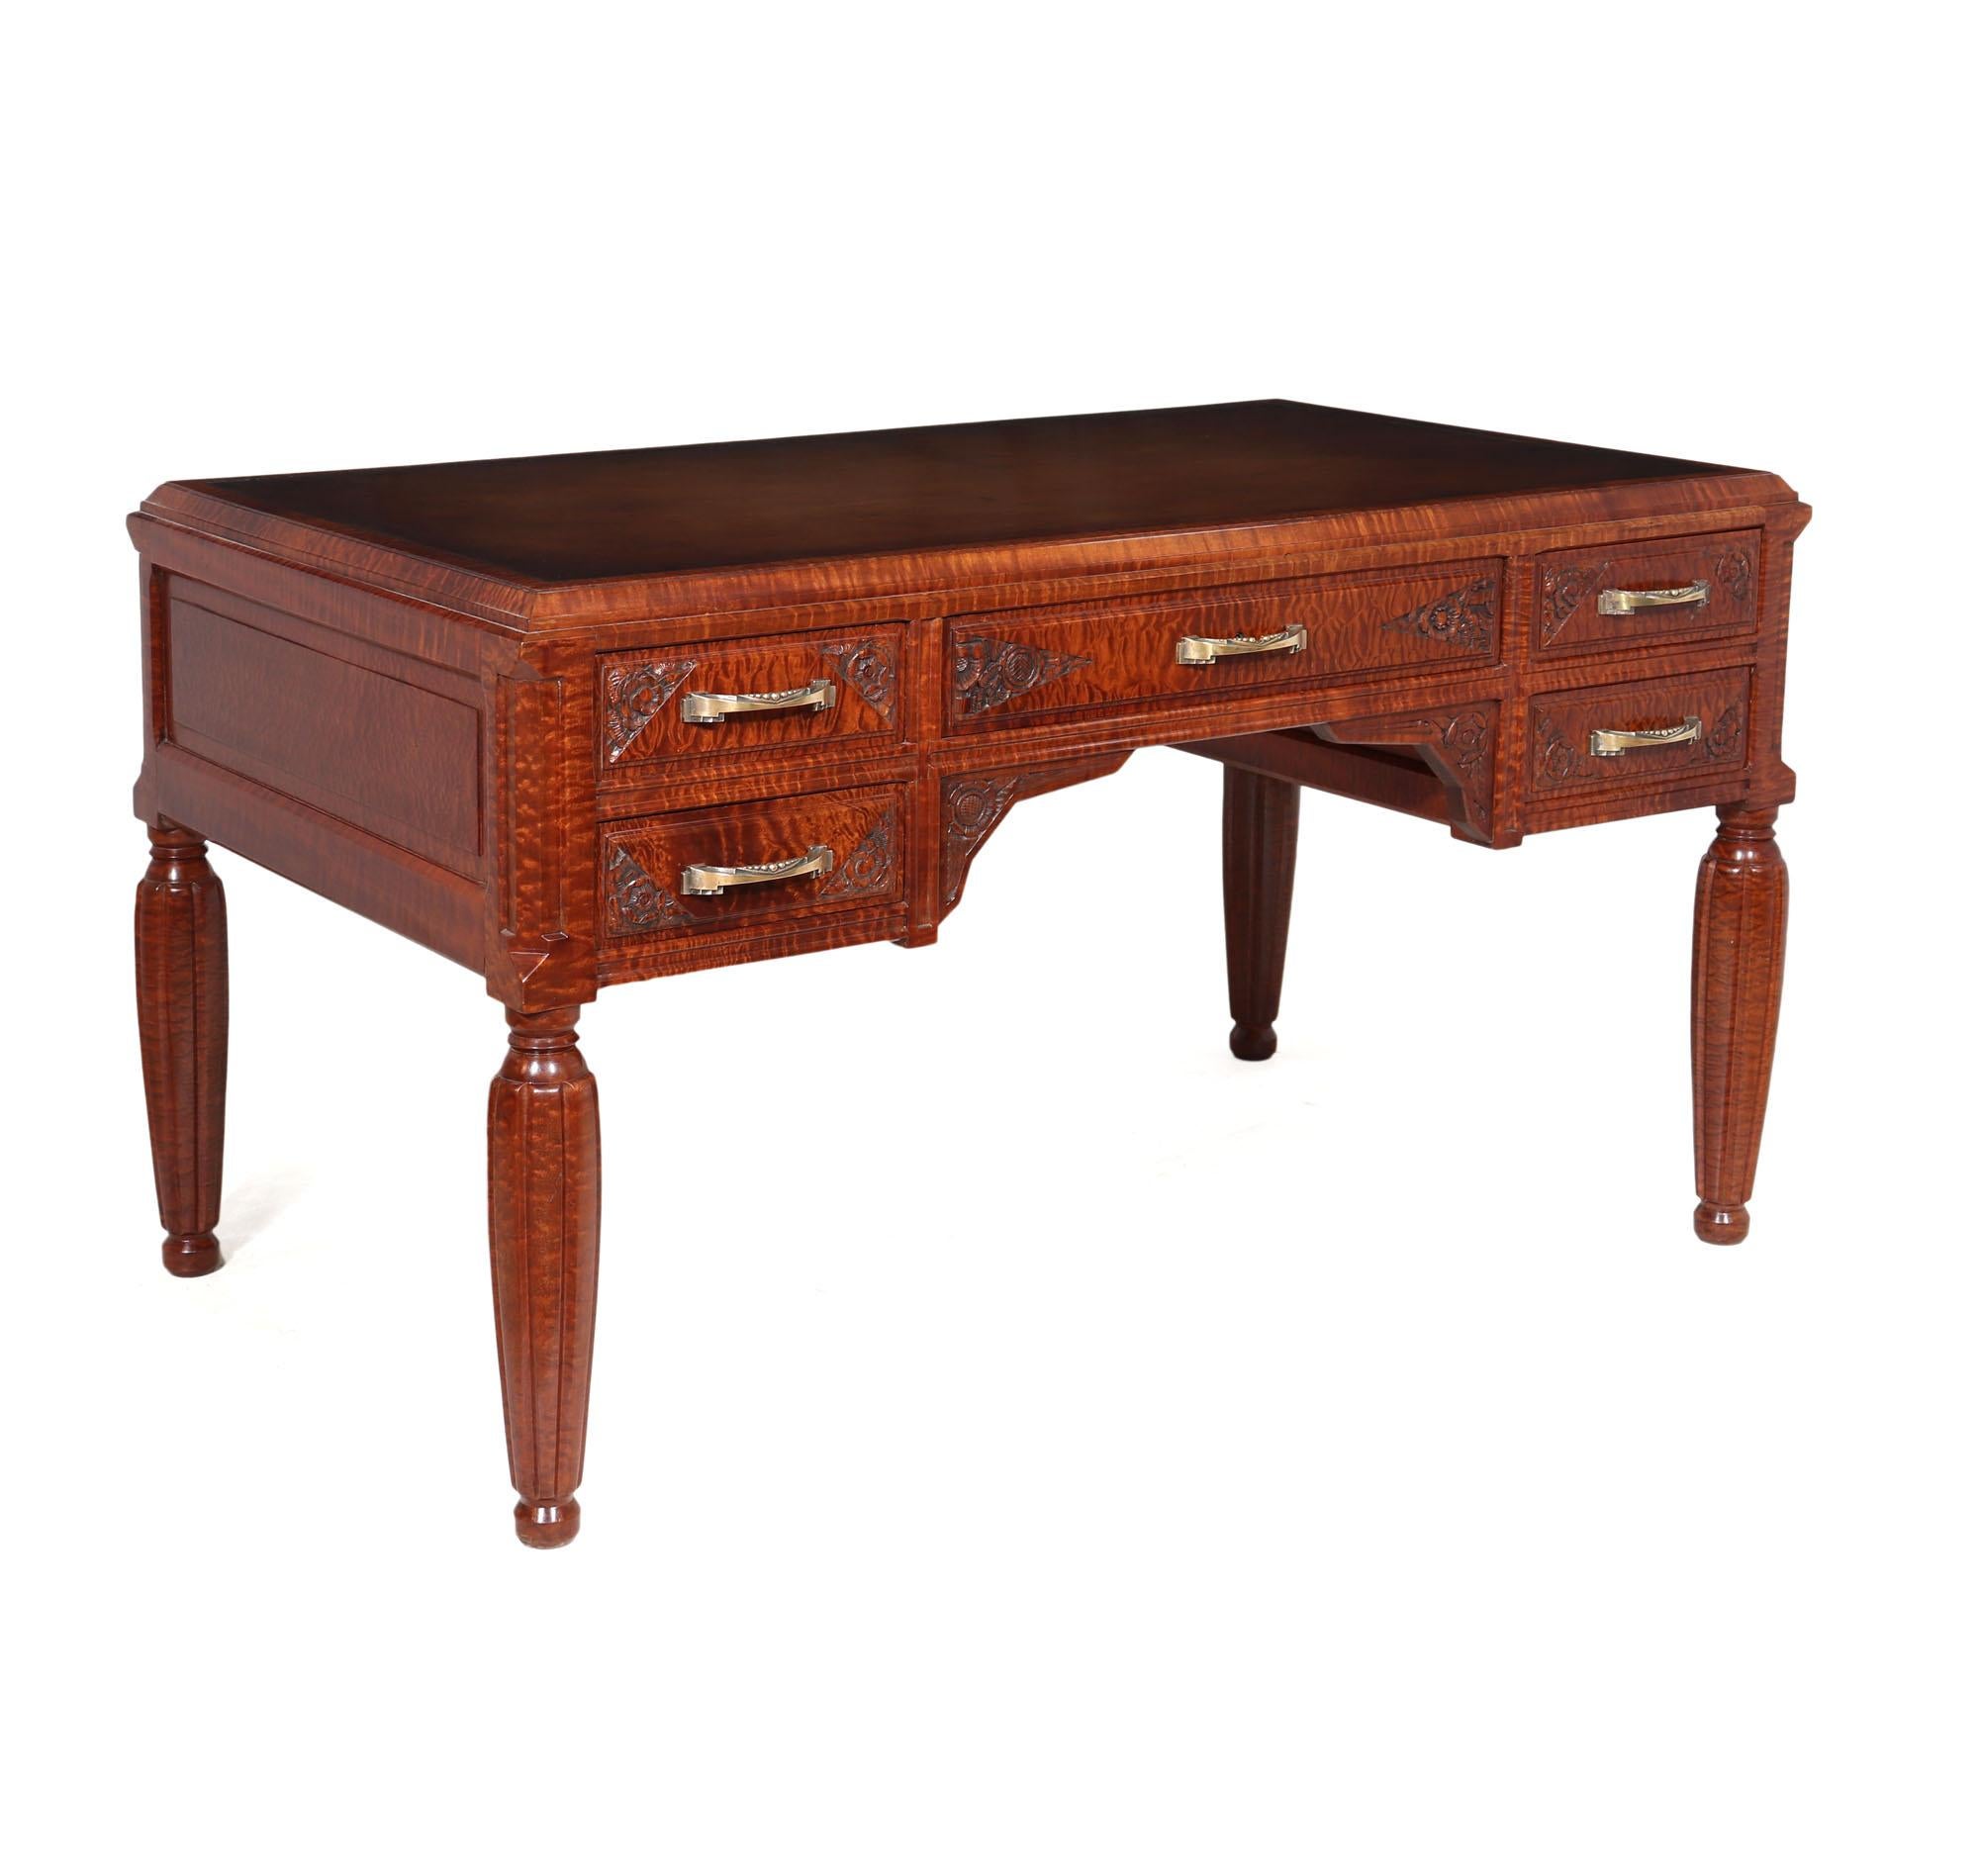 An exceptional quality French Art Deco desk, produced around 1925 using solid Pomelle Sapele the desk has five drawers with bronze handles and crisply carved detail, the desk is freestanding and has panelled rear to match the front and stands on a